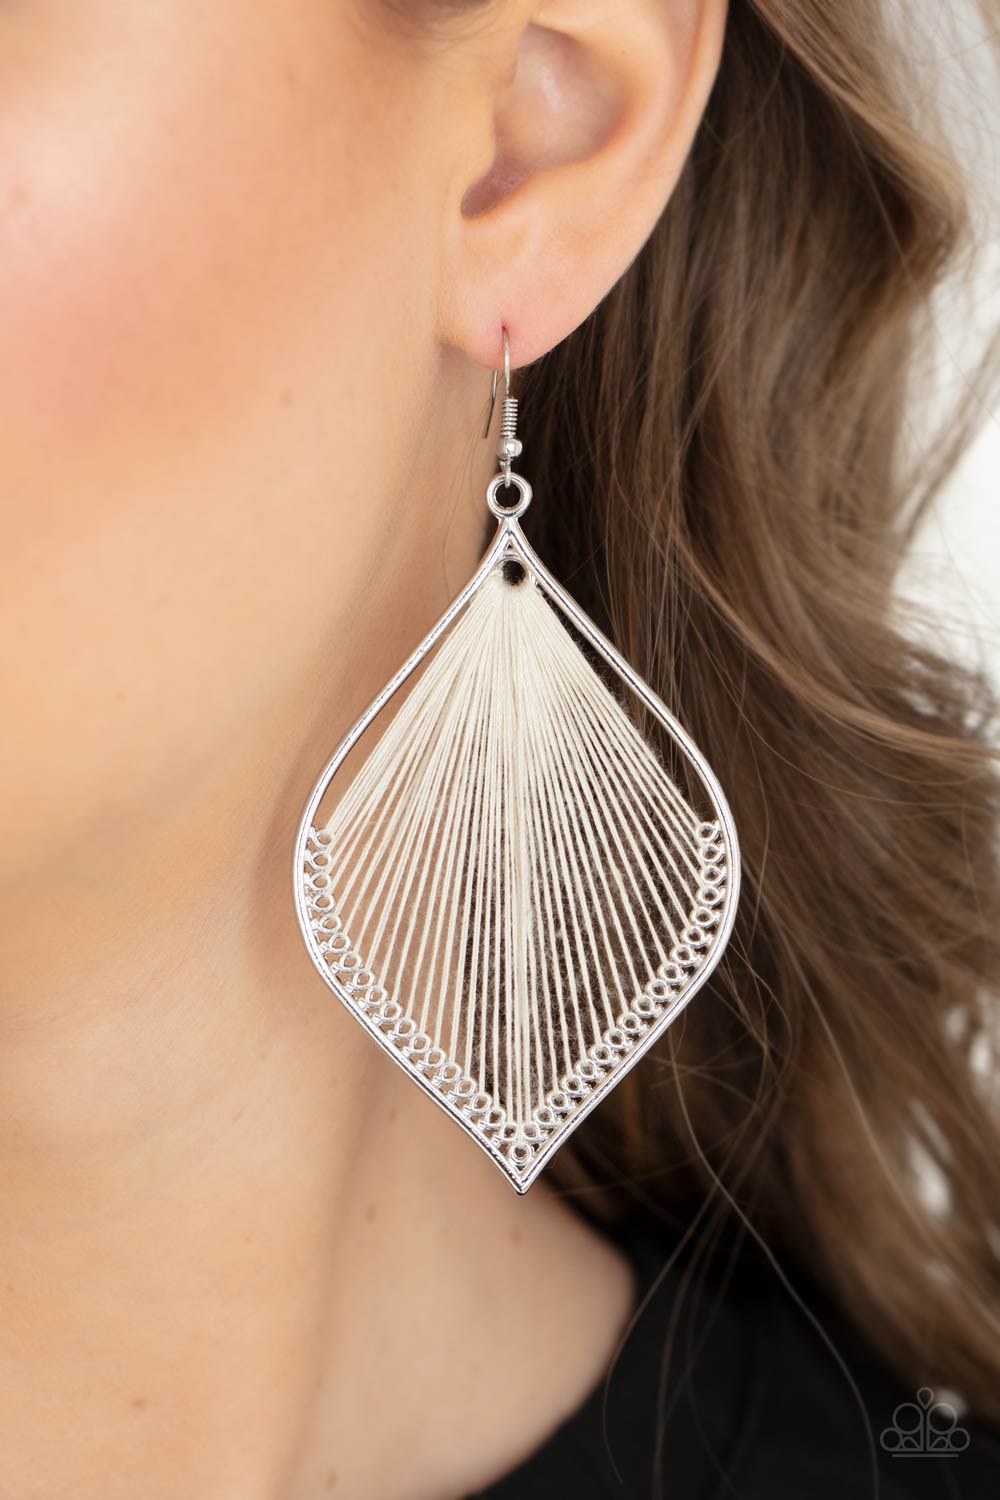 String Theory White Earrings - Paparazzi Accessories- model - CarasShop.com - $5 Jewelry by Cara Jewels